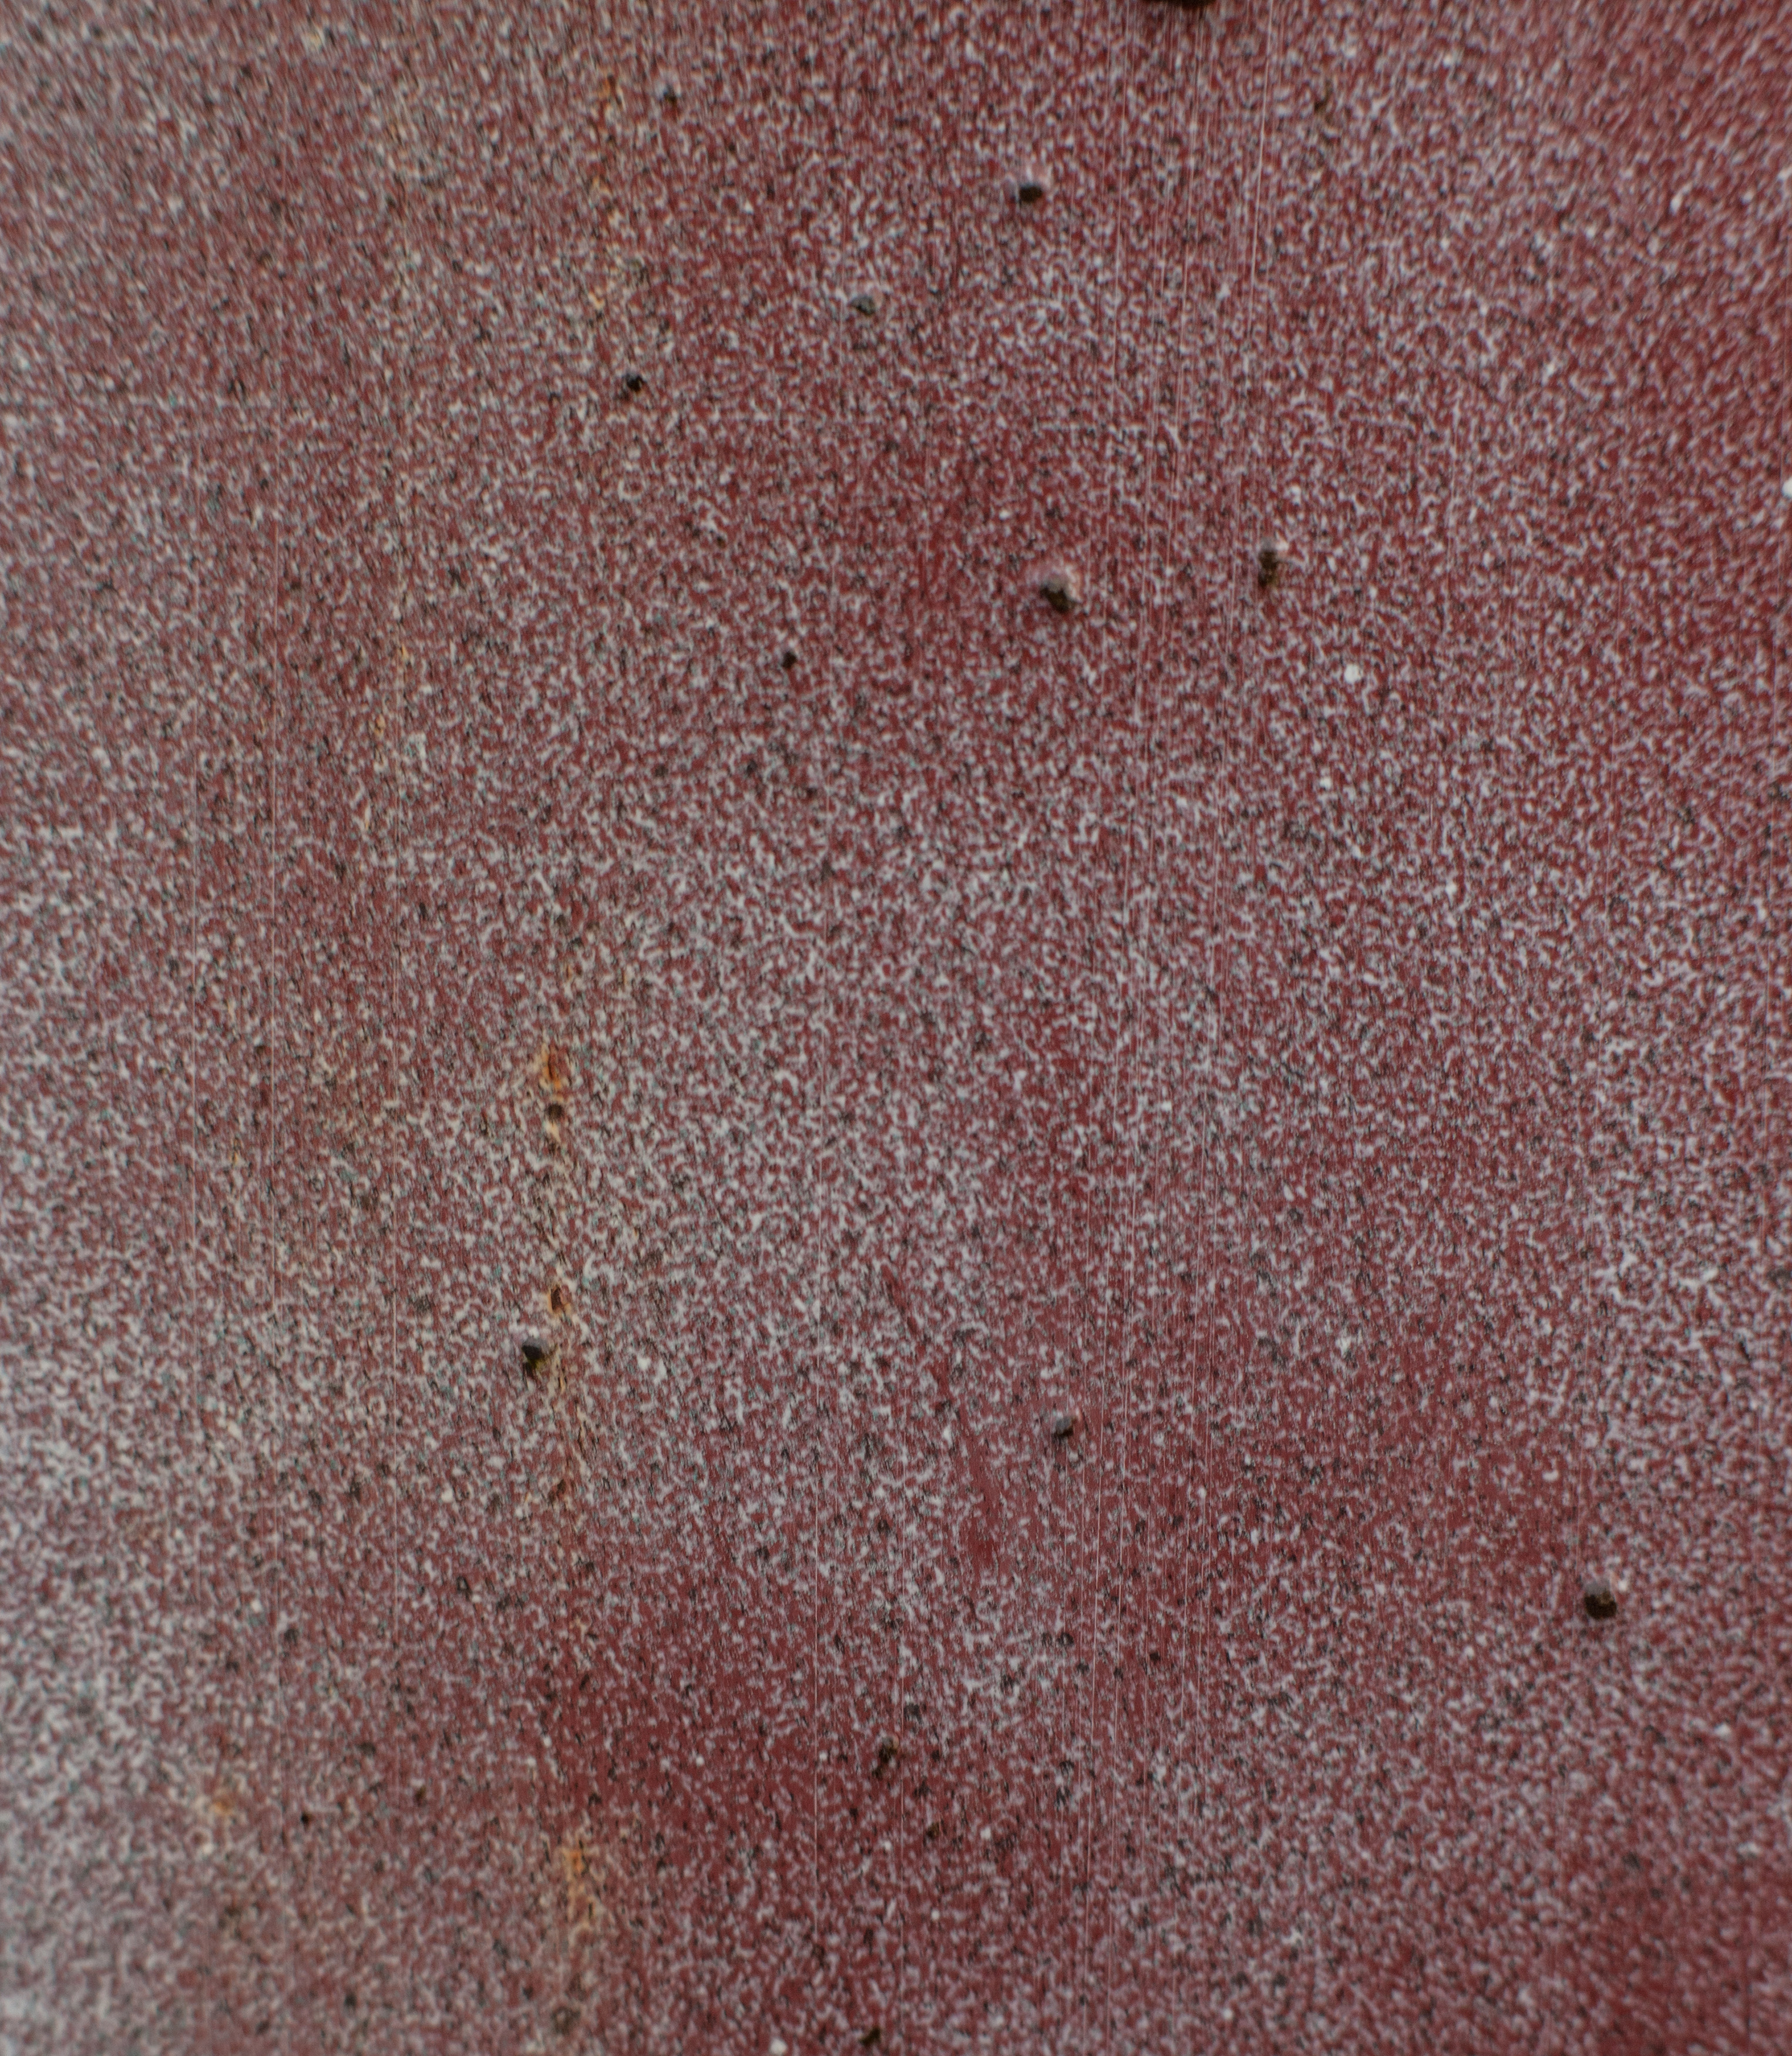 Rust | indiedesigner.com - FREE Textures - Backgrounds - Borders for ...